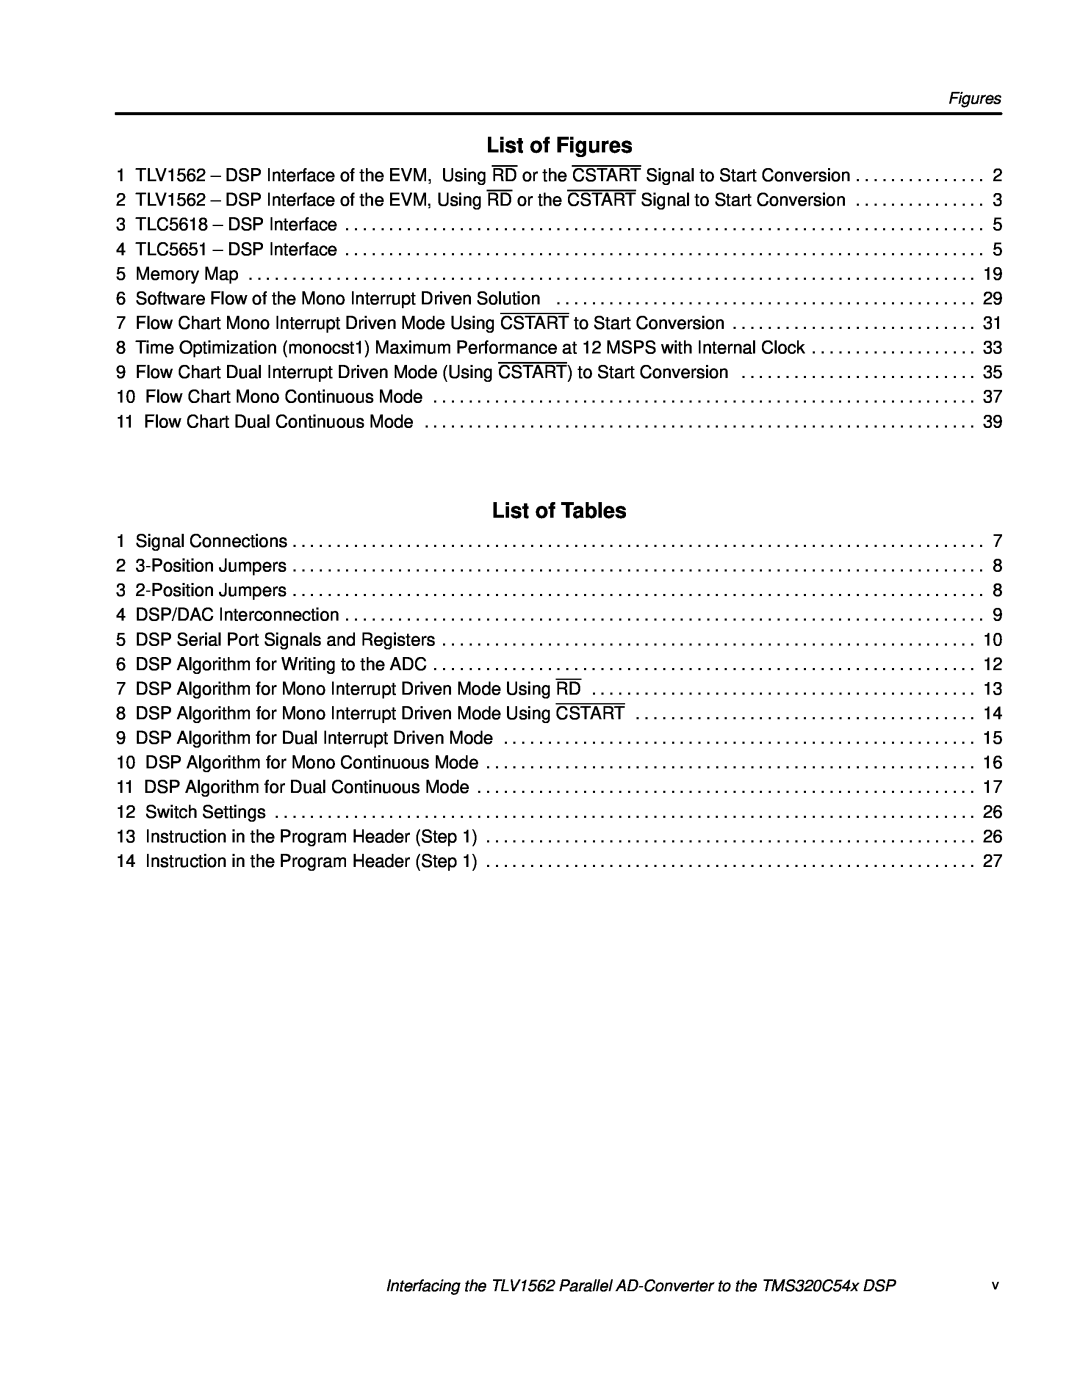 Texas Instruments TLV1562 manual List of Figures, List of Tables 